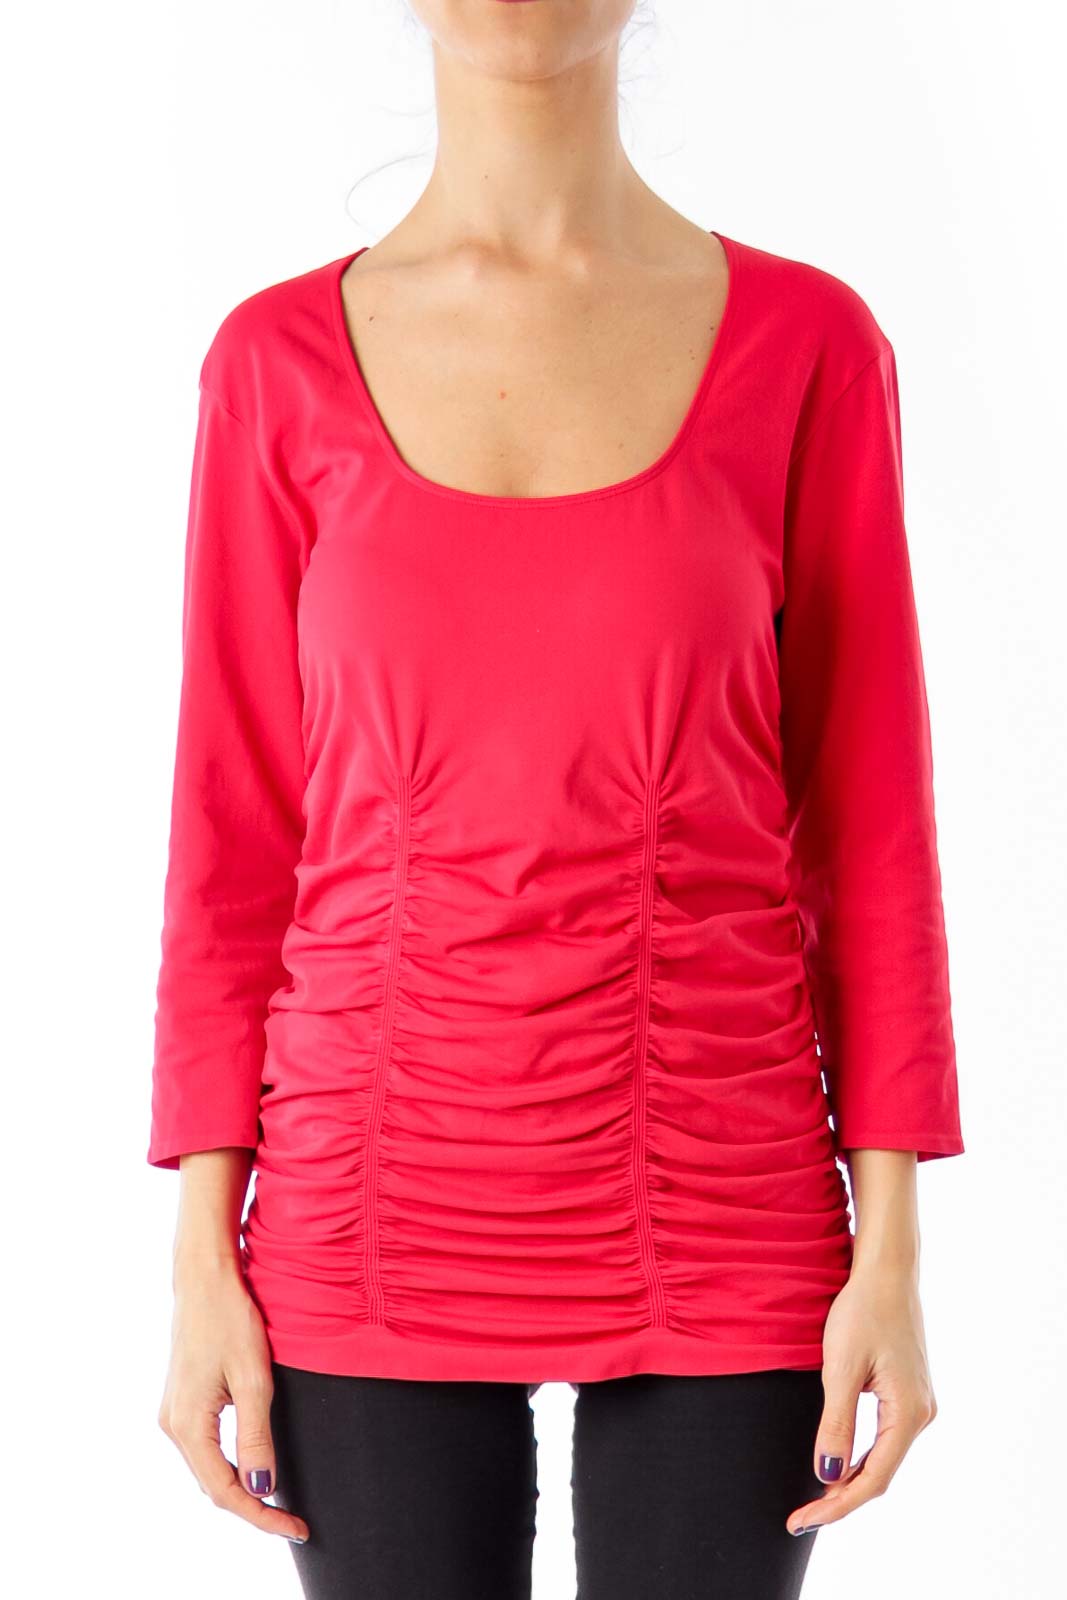 Red Ruffle Quarter Sleeve Top Front